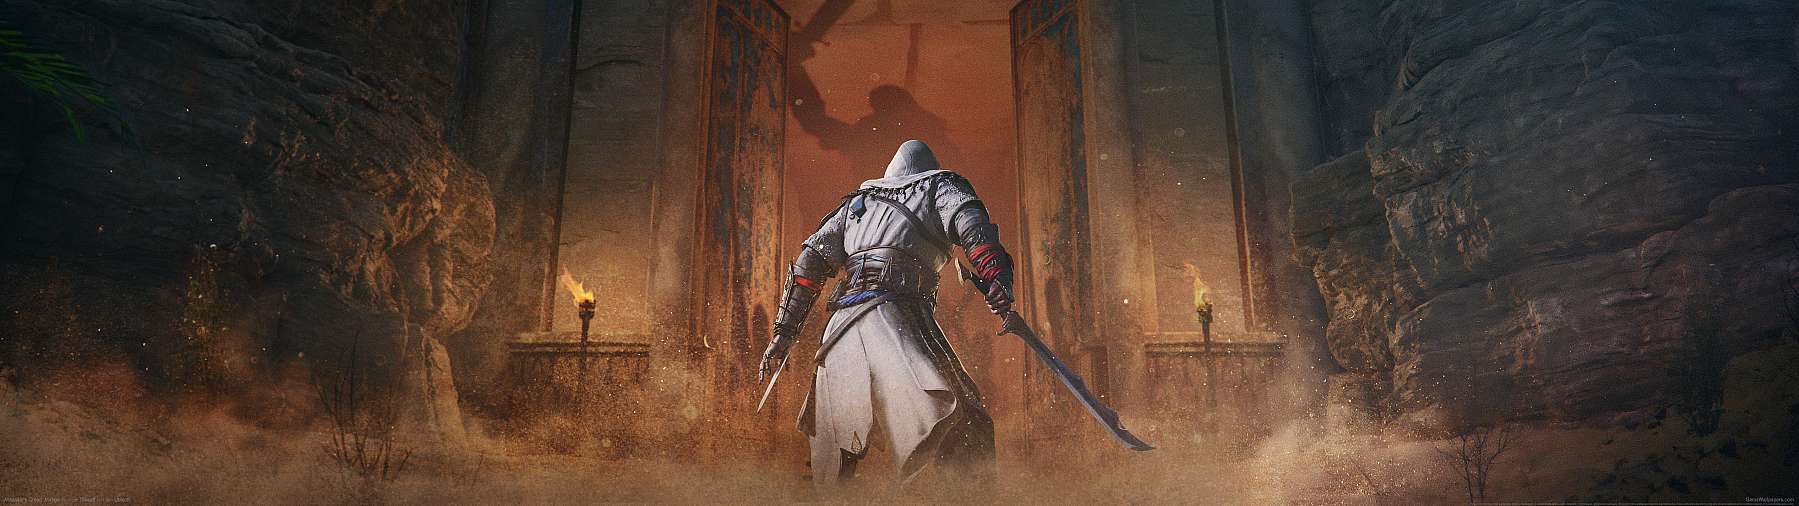 Assassin's Creed: Mirage superwide wallpaper or background 05